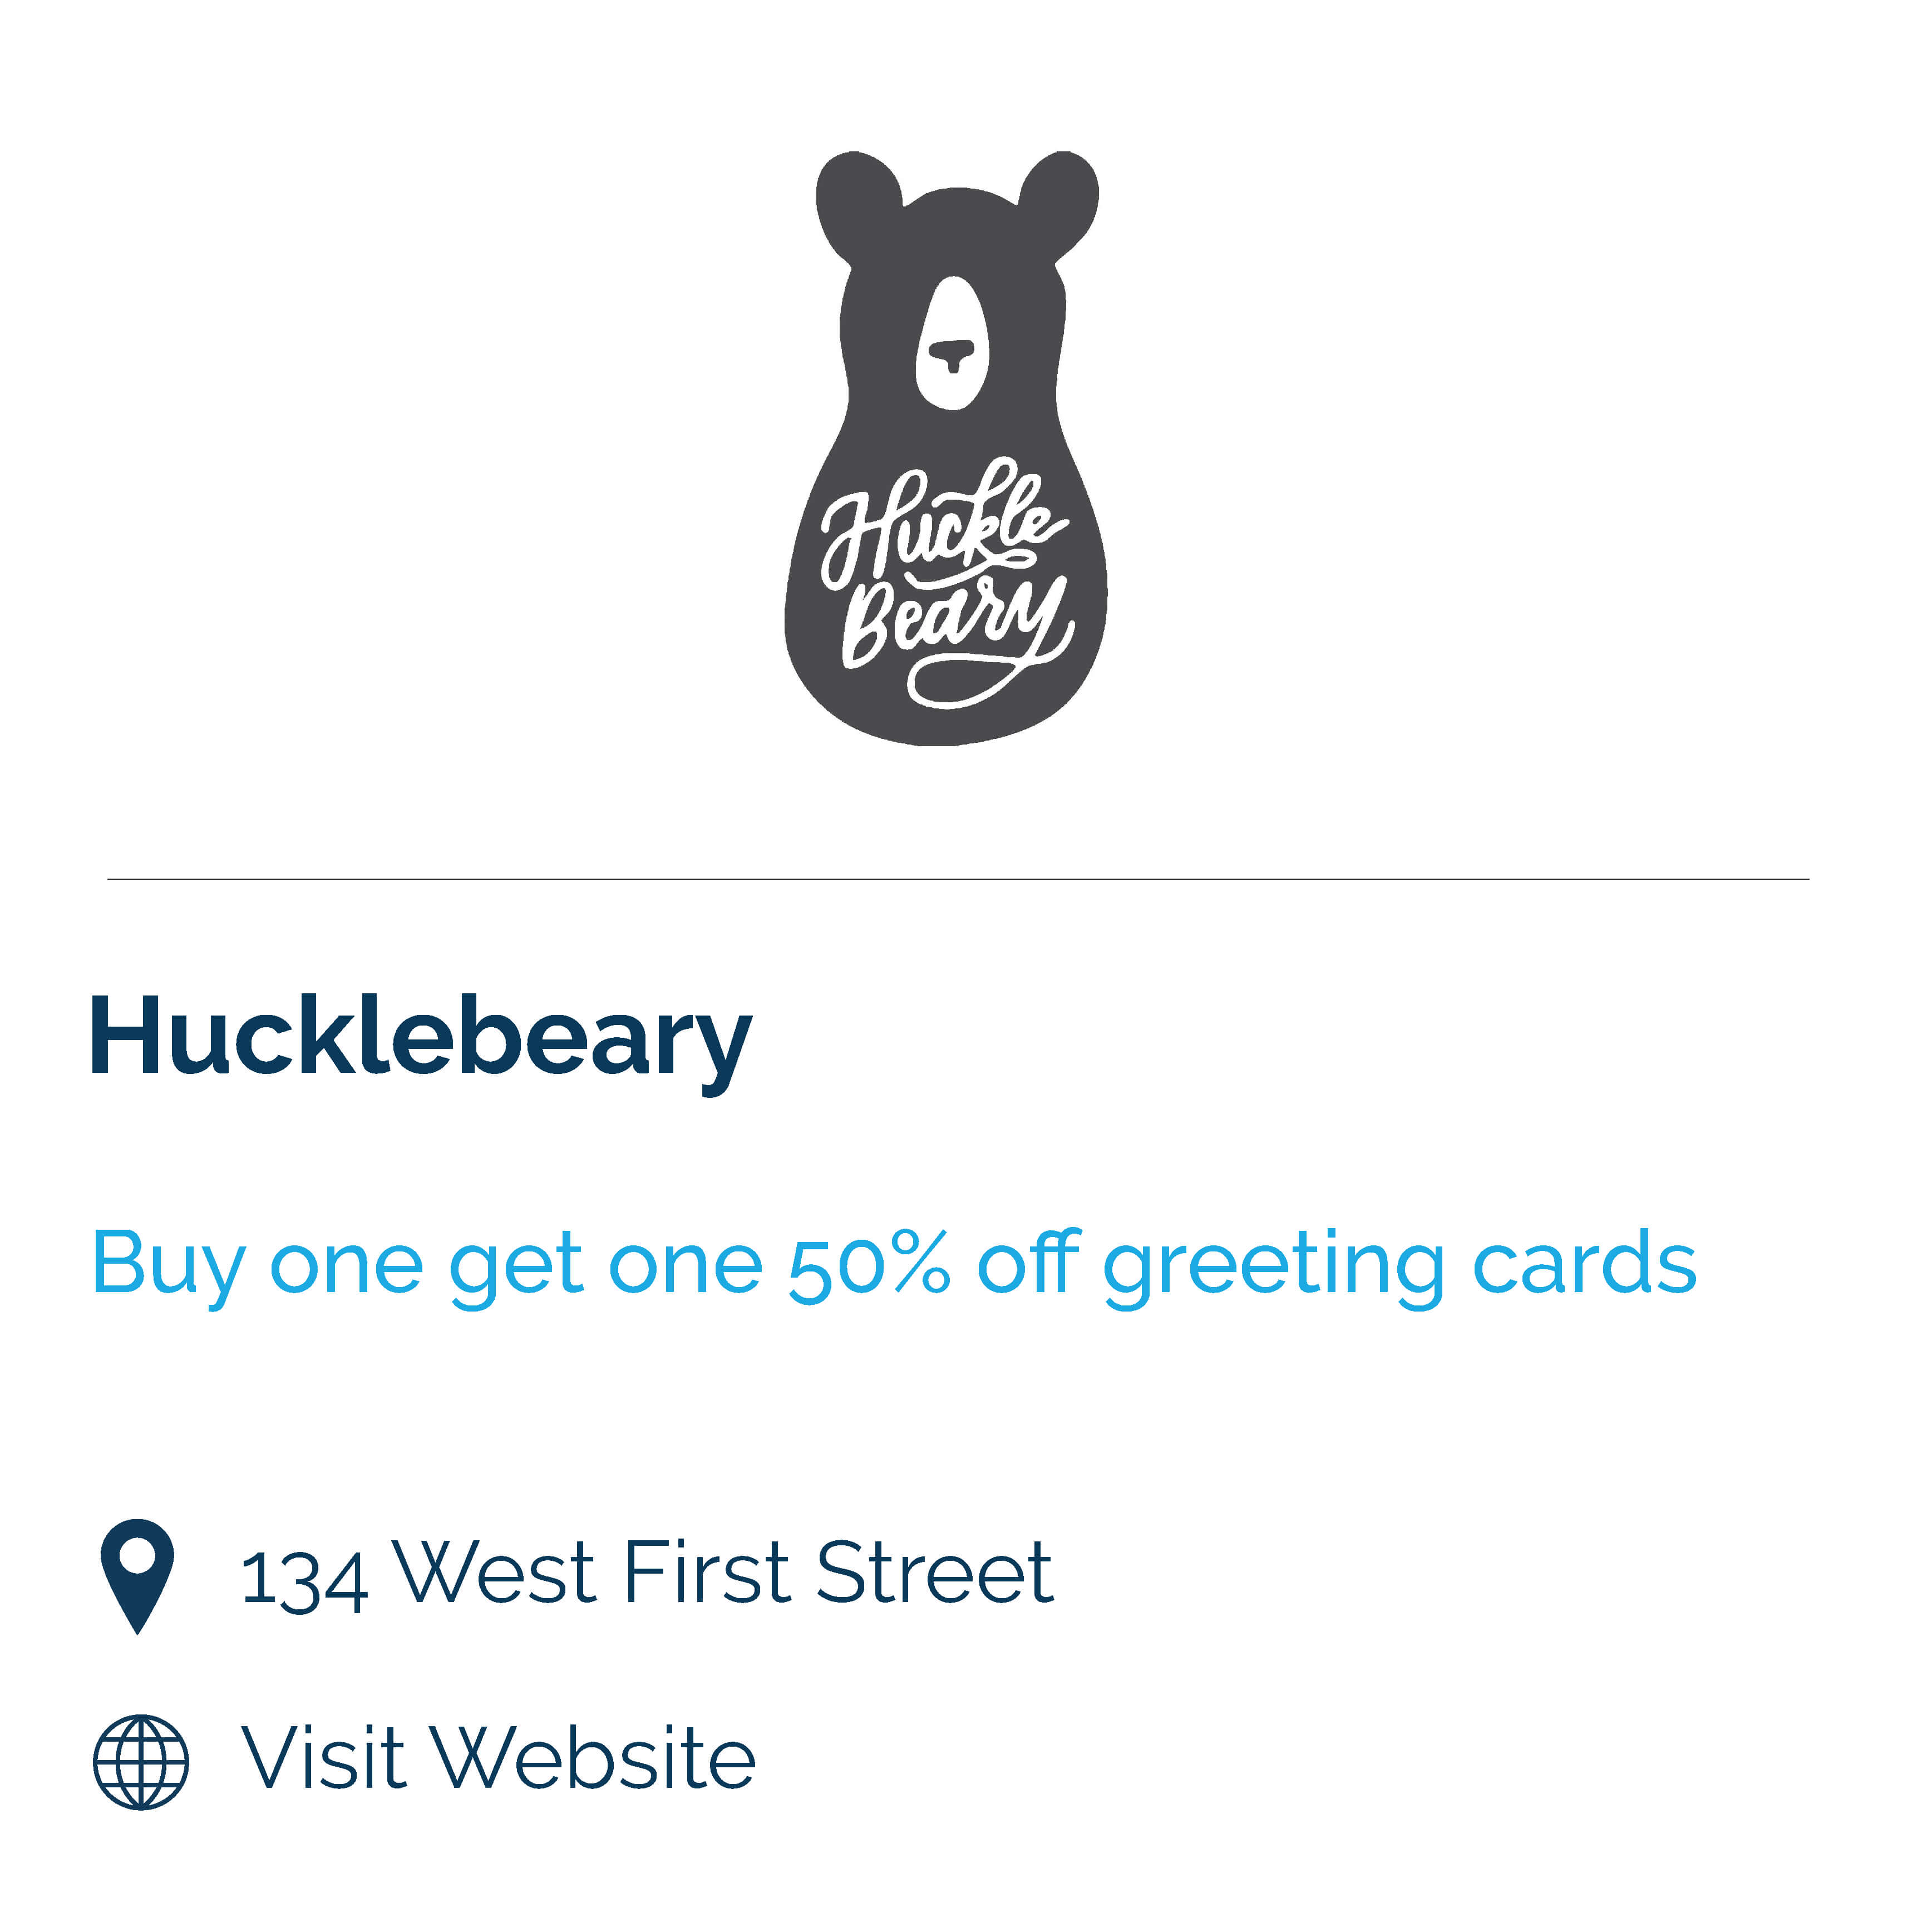 hucklebeary. buy one get one 50% off greeting cards. 134 w first street